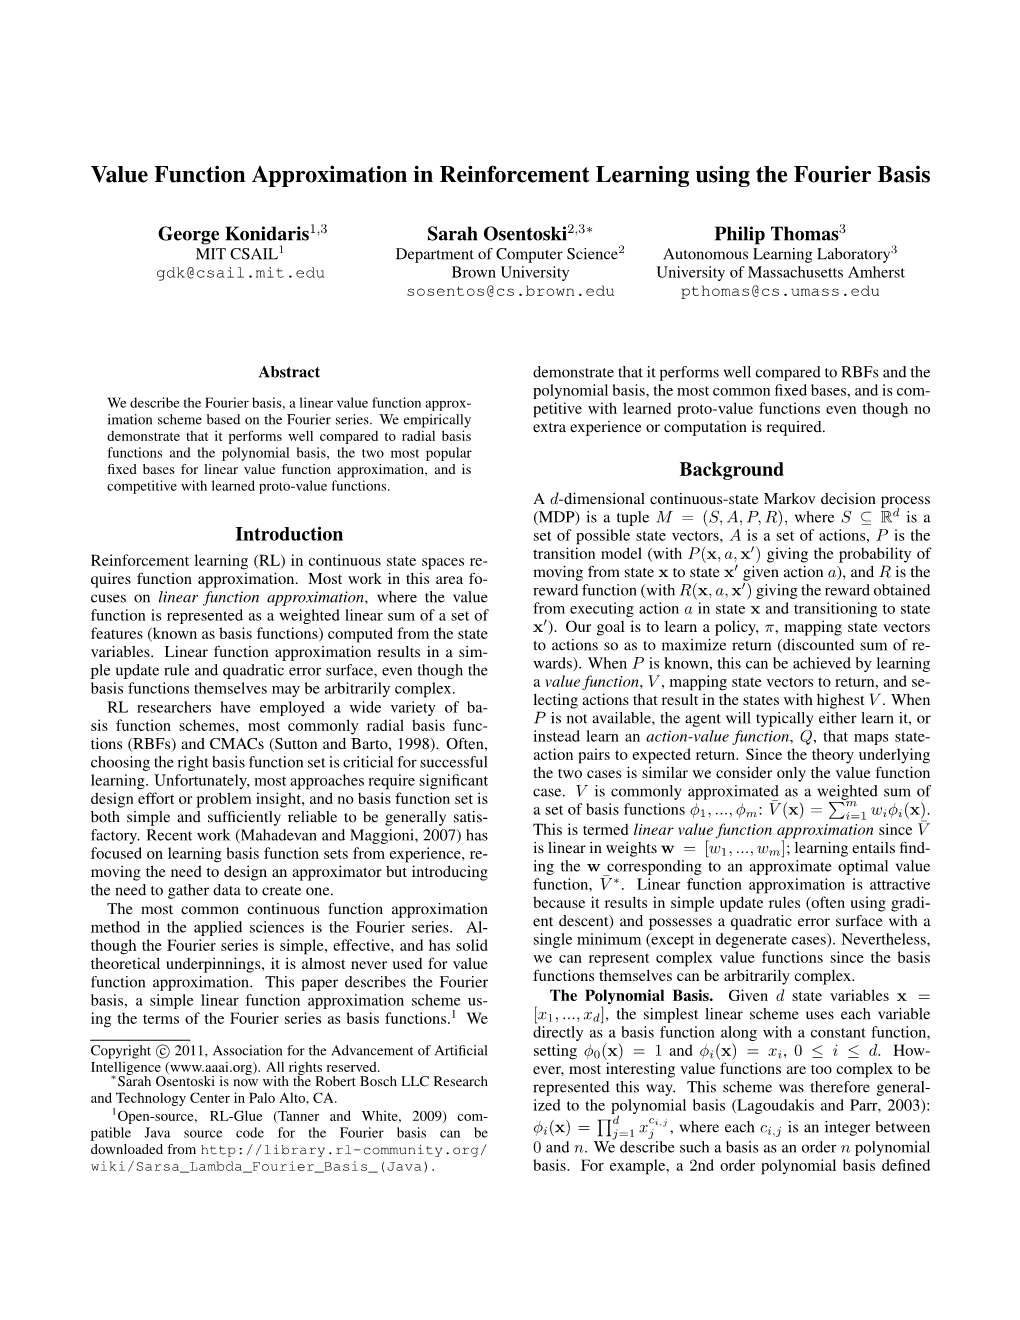 Value Function Approximation in Reinforcement Learning Using the Fourier Basis